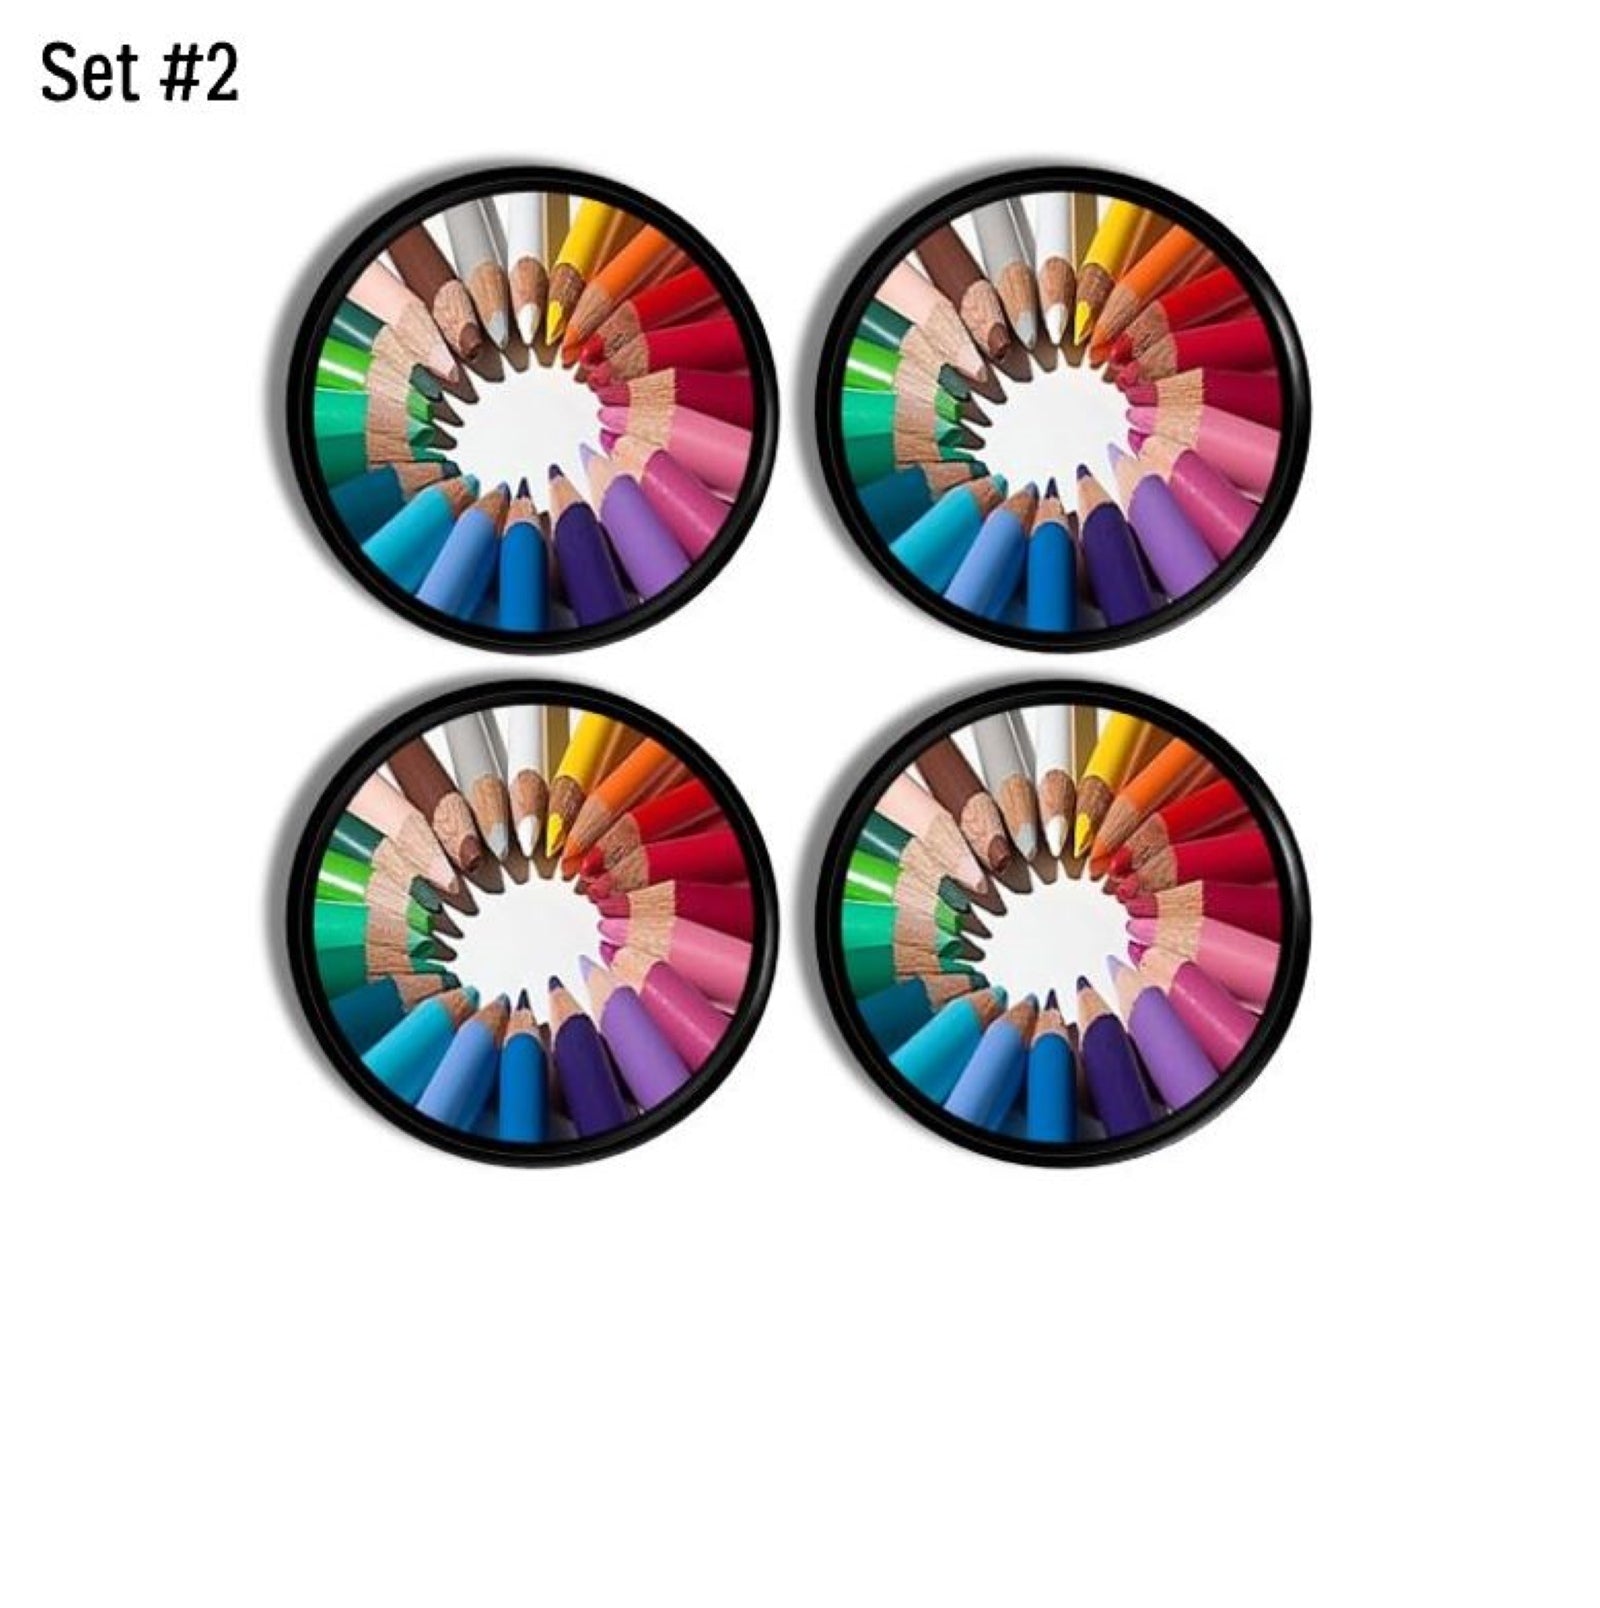 Set of 4 cabinet and drawer knobs with a full color spectrum of art pencils. Colorful replacement hardware for kids furniture.